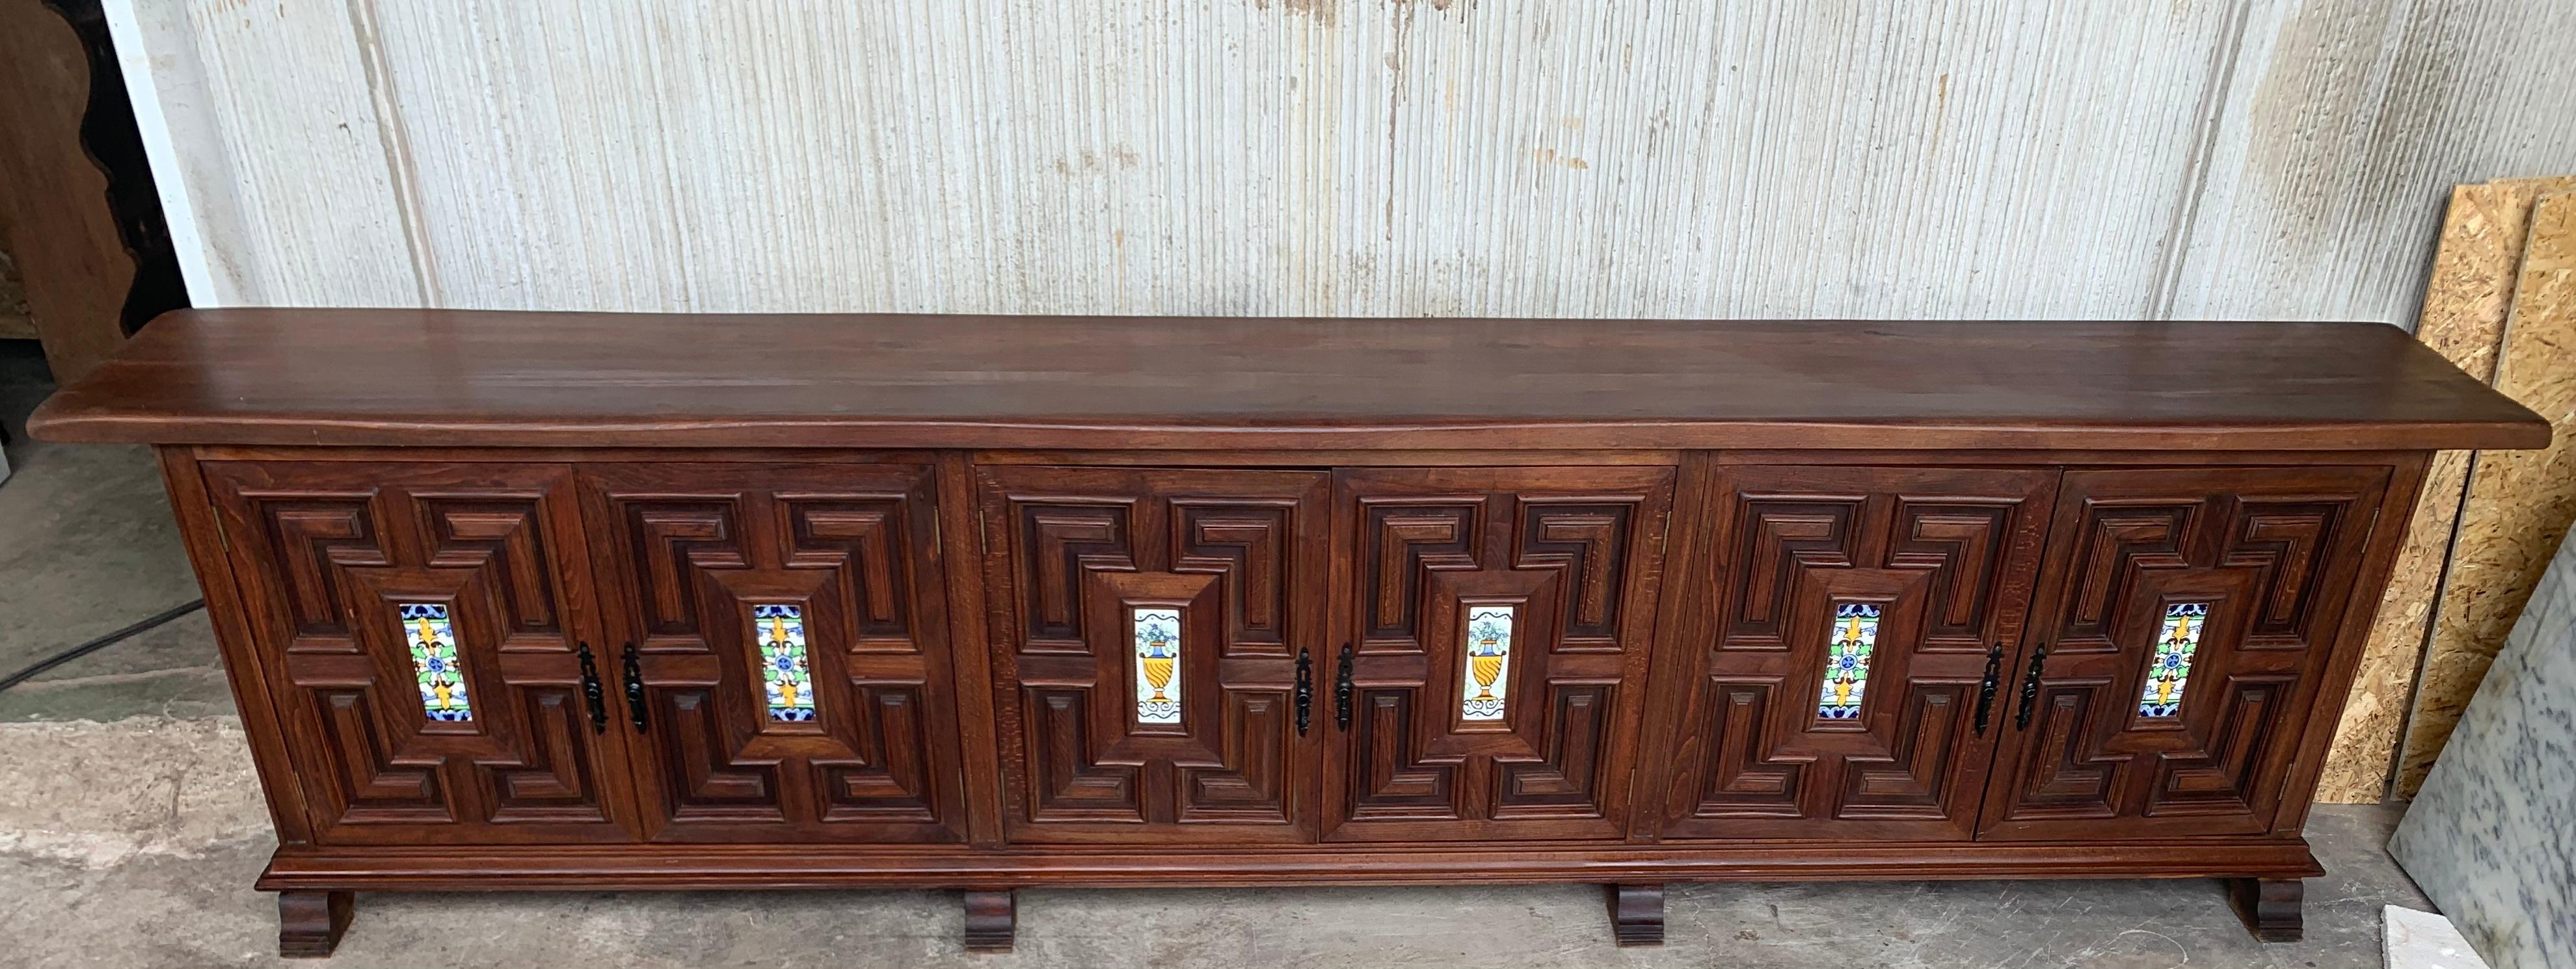 19th Century Large Catalan Spanish Baroque Carved Oak Tuscan Credenza or Buffet In Good Condition For Sale In Miami, FL